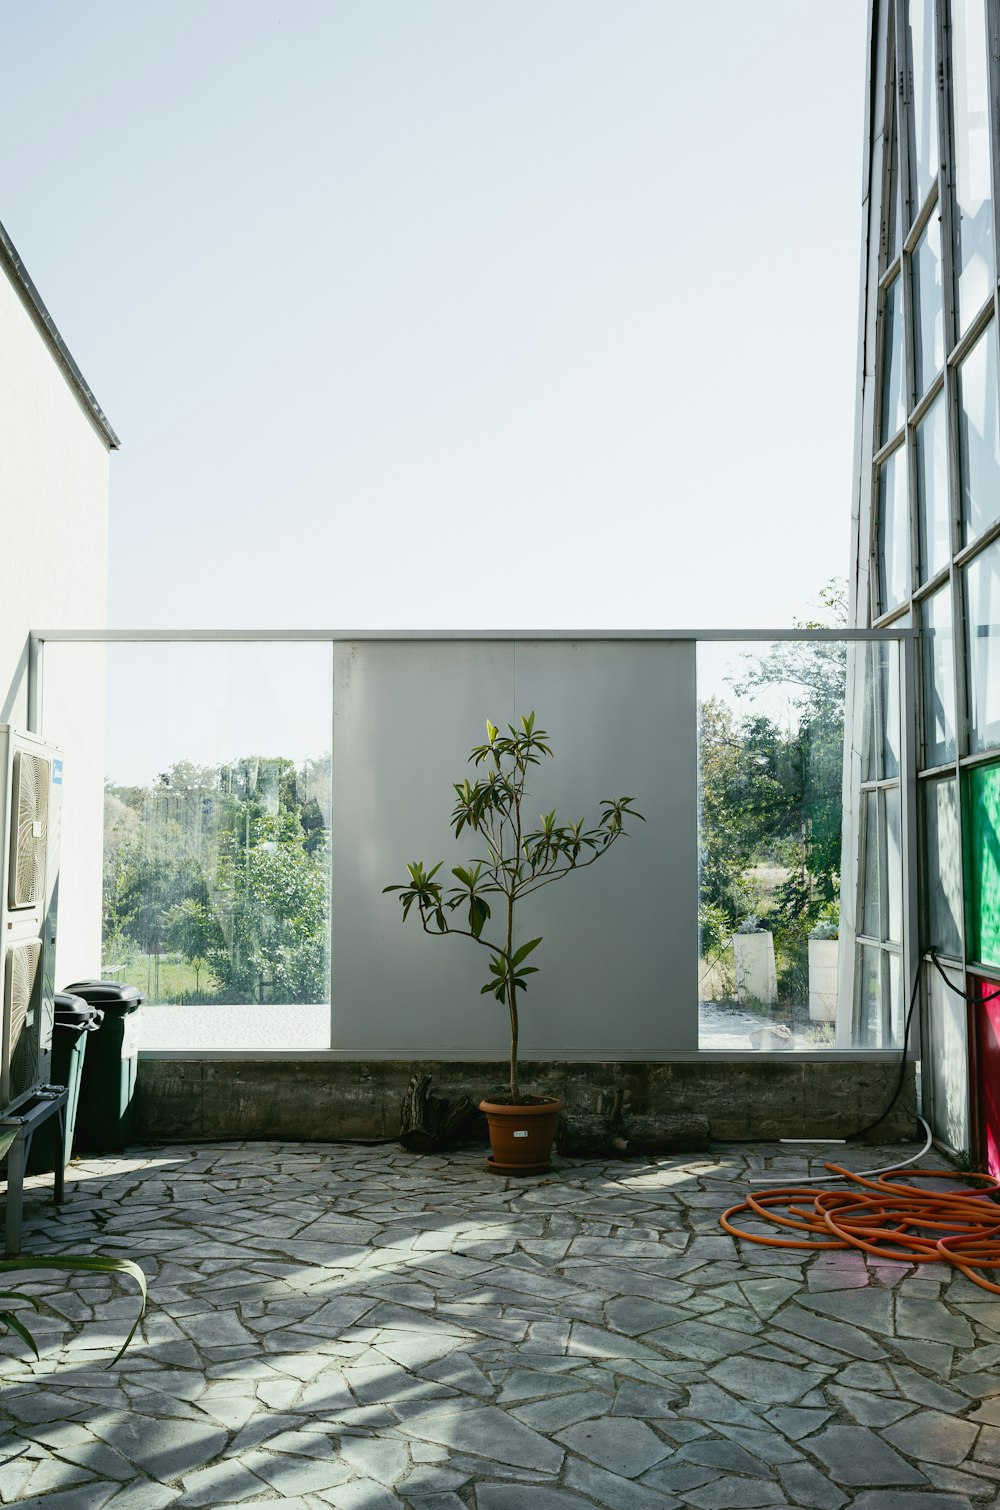 a small tree in a pot on a patio